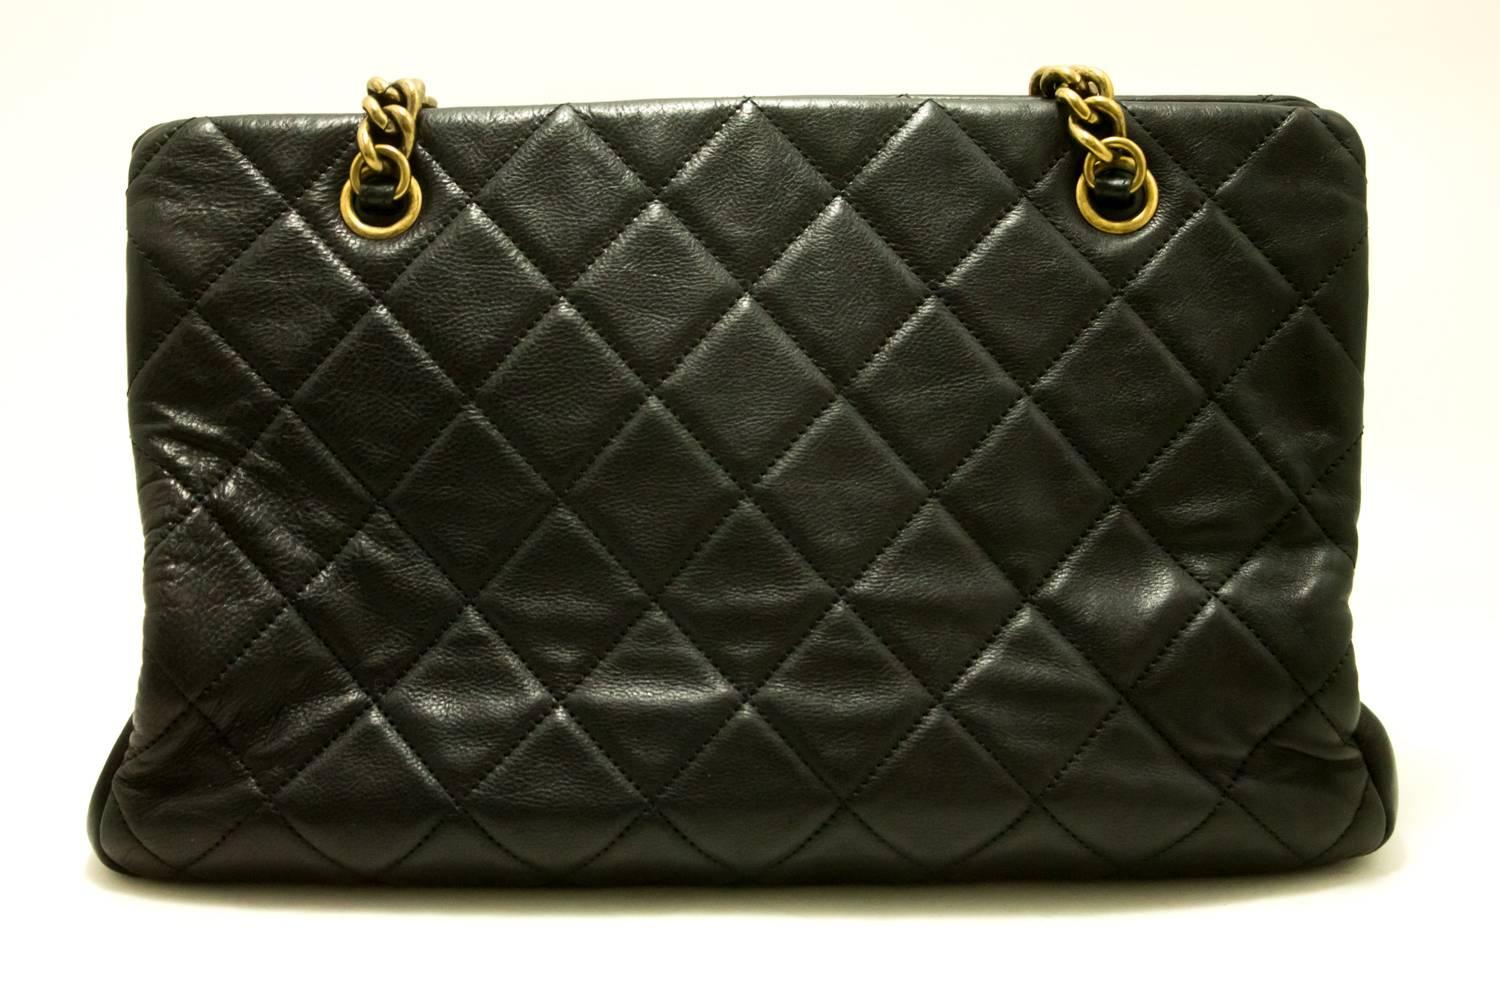 Authentic CHANEL Calfskin 2012 Antique Gold Chain Shoulder Bag Black Quilted f17 6